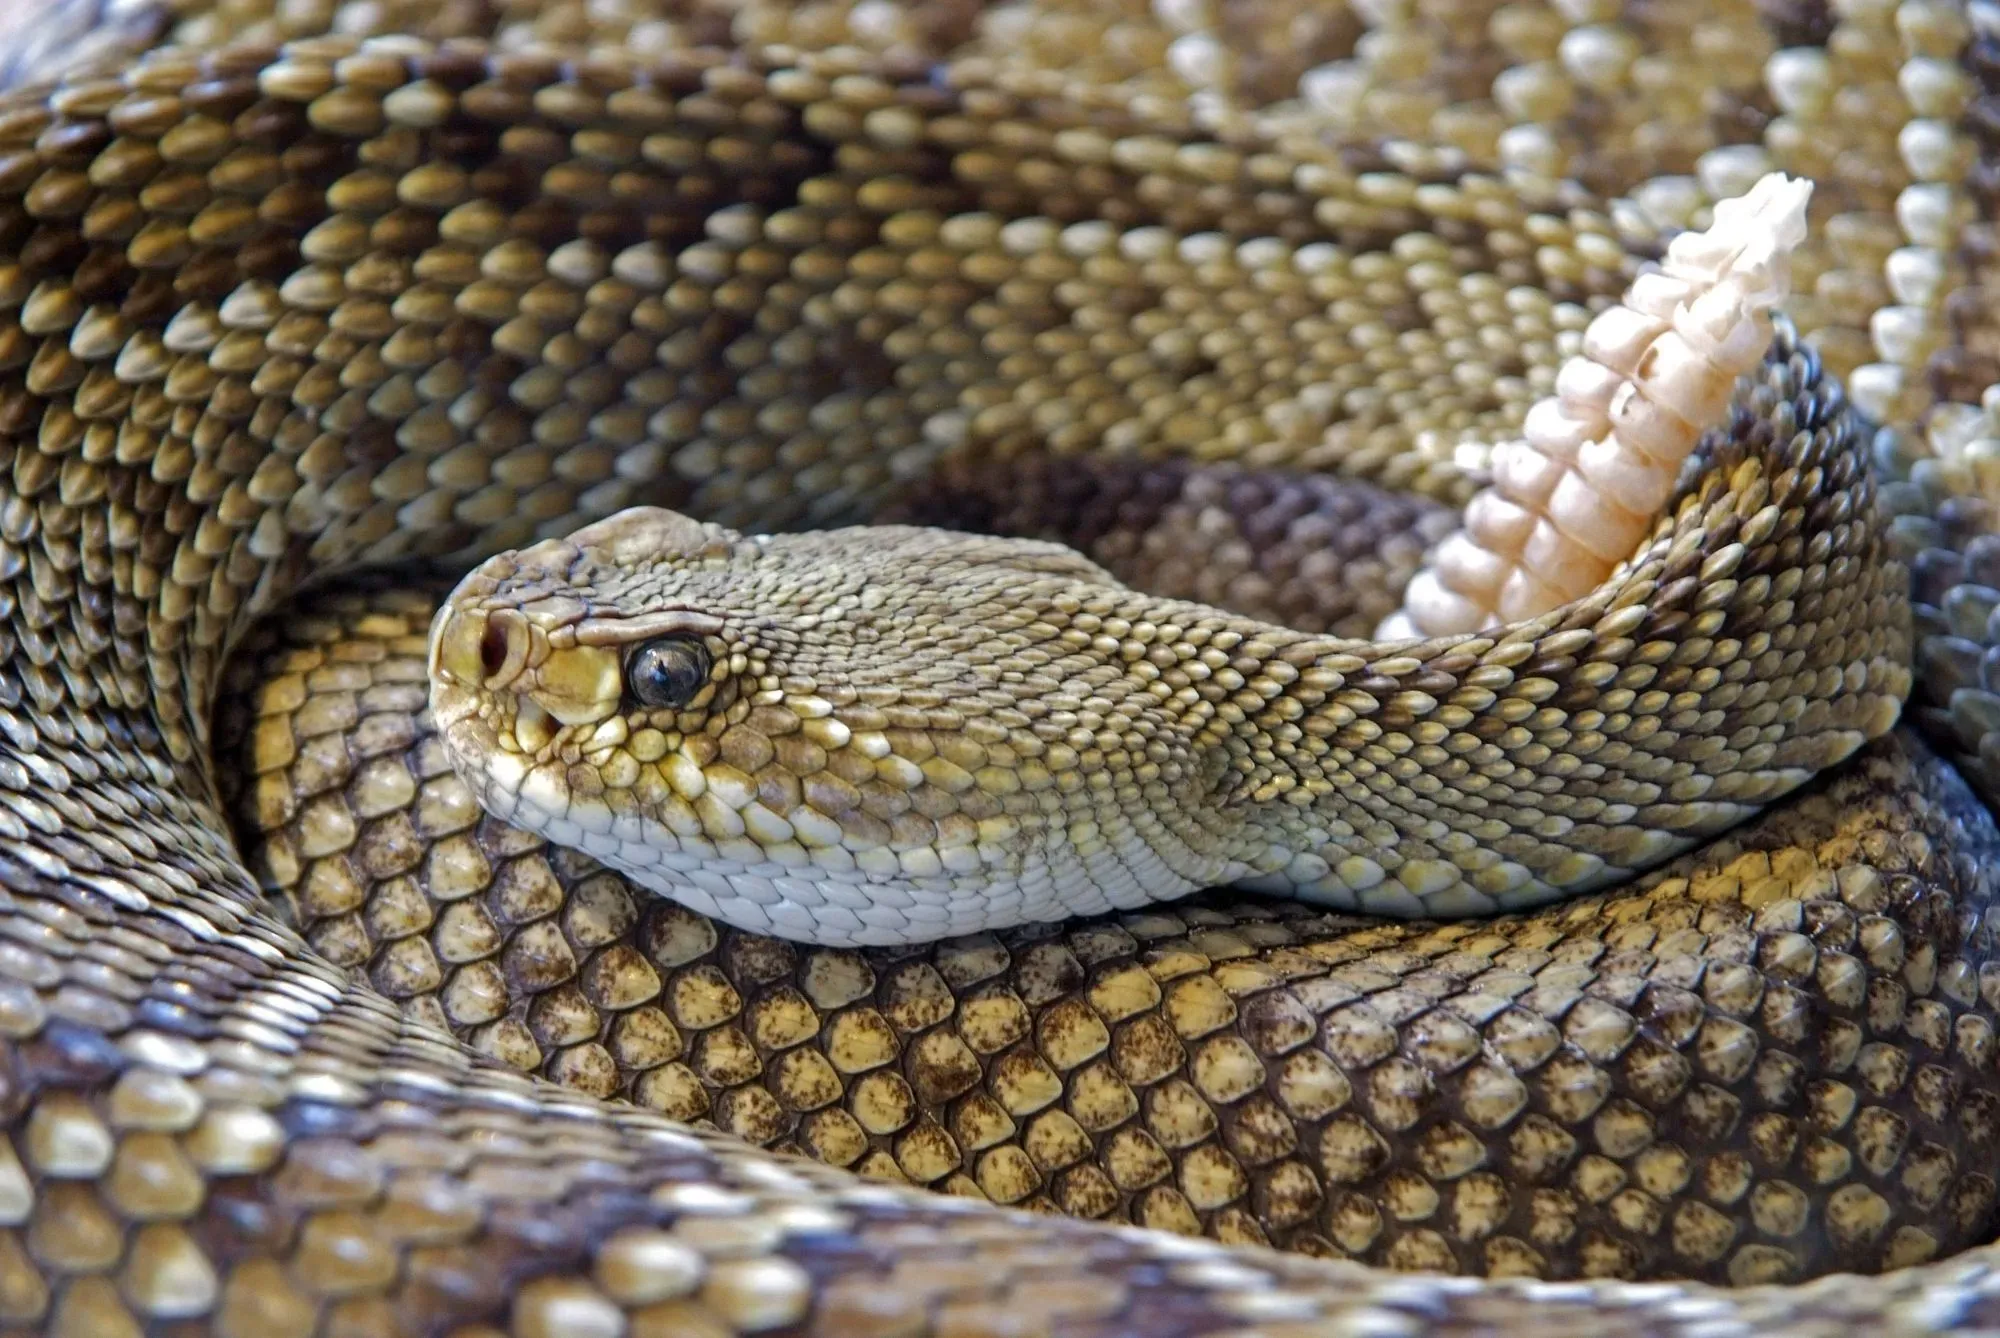 Do rattlesnakes lay eggs is a common question among zoologists.